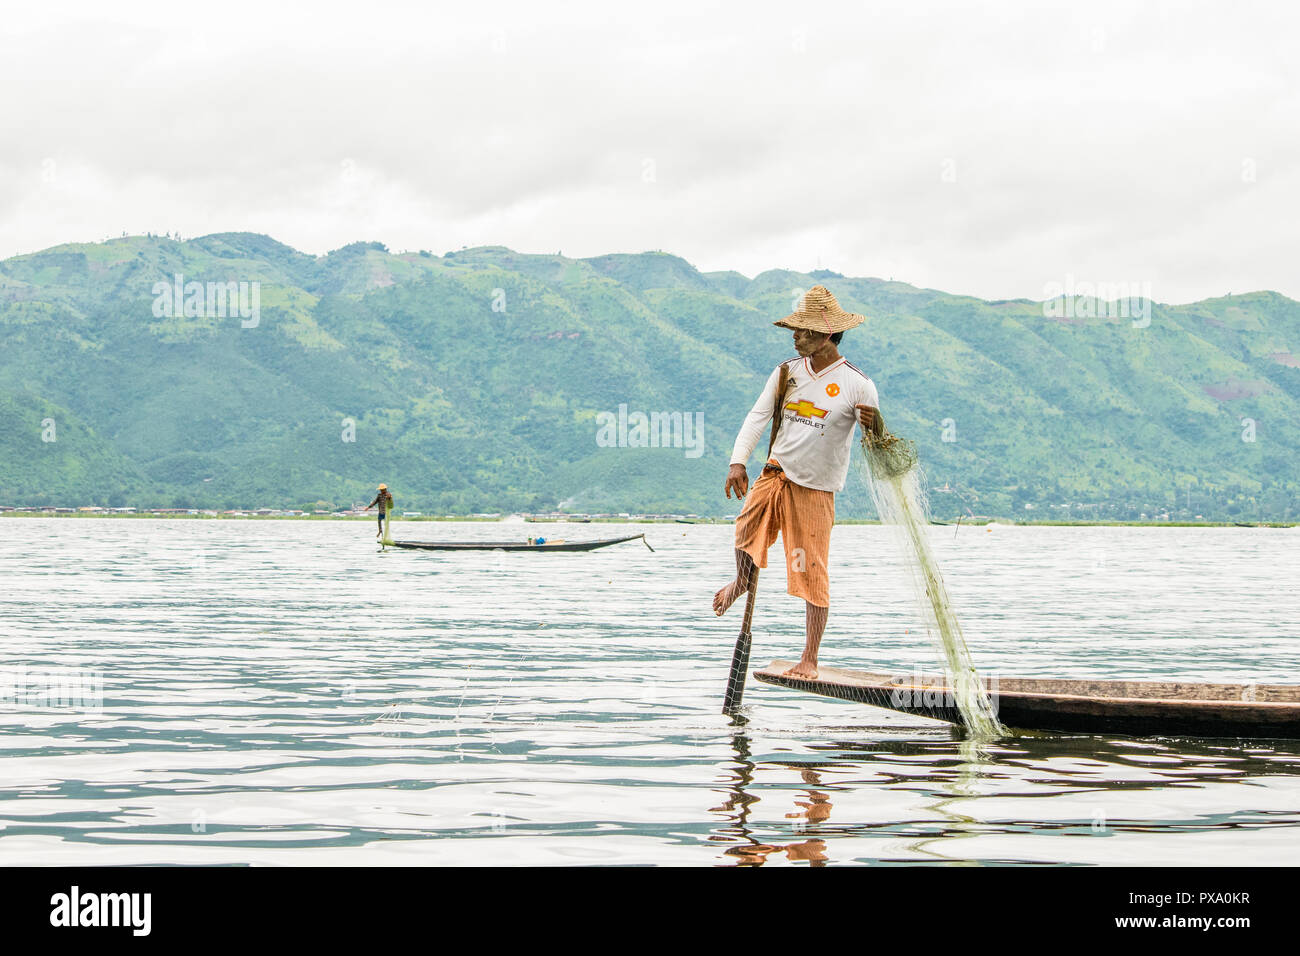 Travel: local young Burmese fisherman wearing Manchester United shirt, balancing and steering boat with his foot in Inle Lake, Burma, Myanmar, Asia Stock Photo